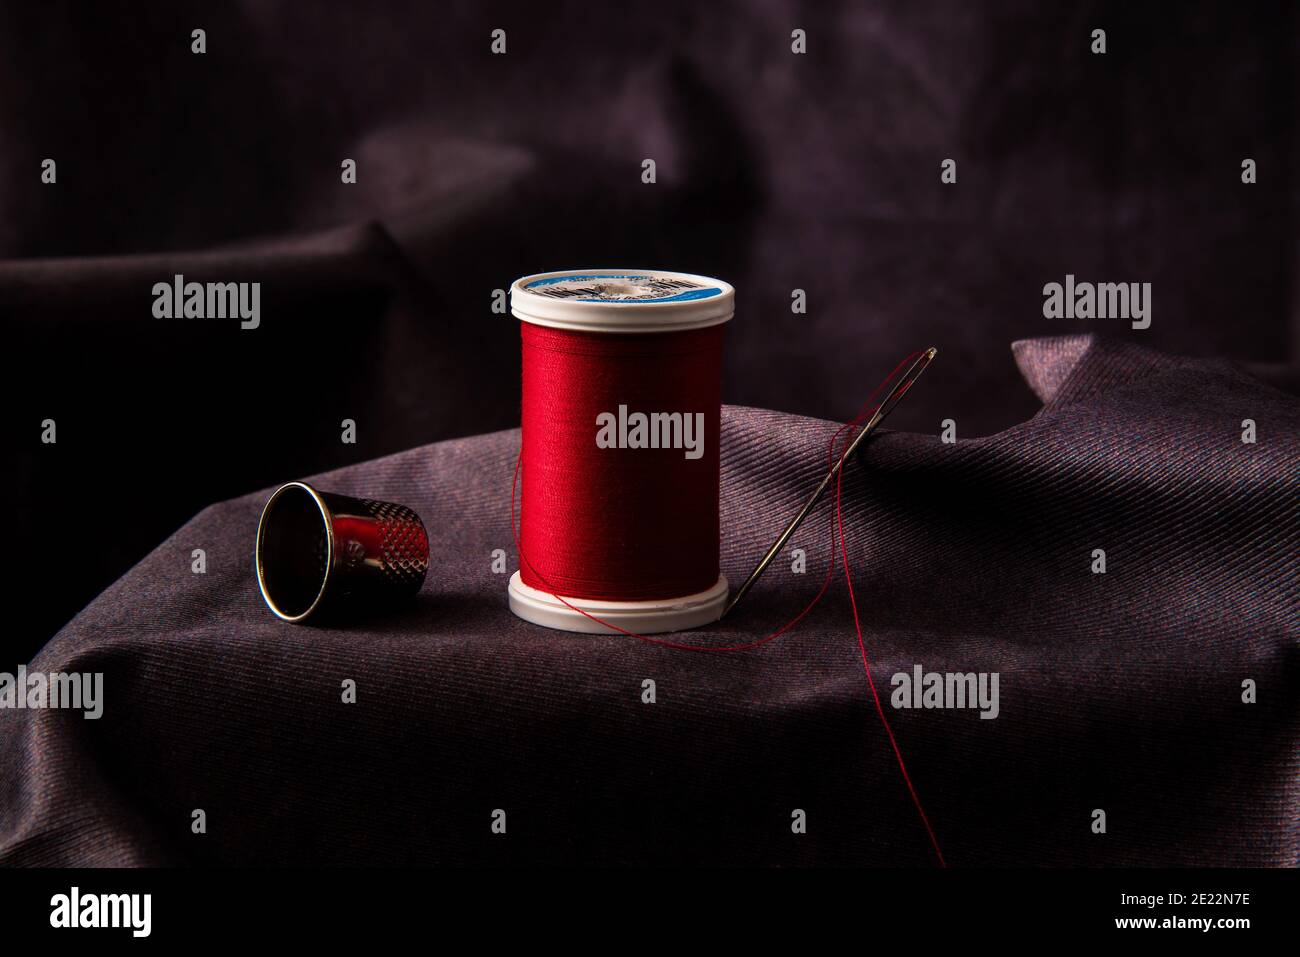 Thread, needle, thimble, and scissors against a dark background. Stock Photo